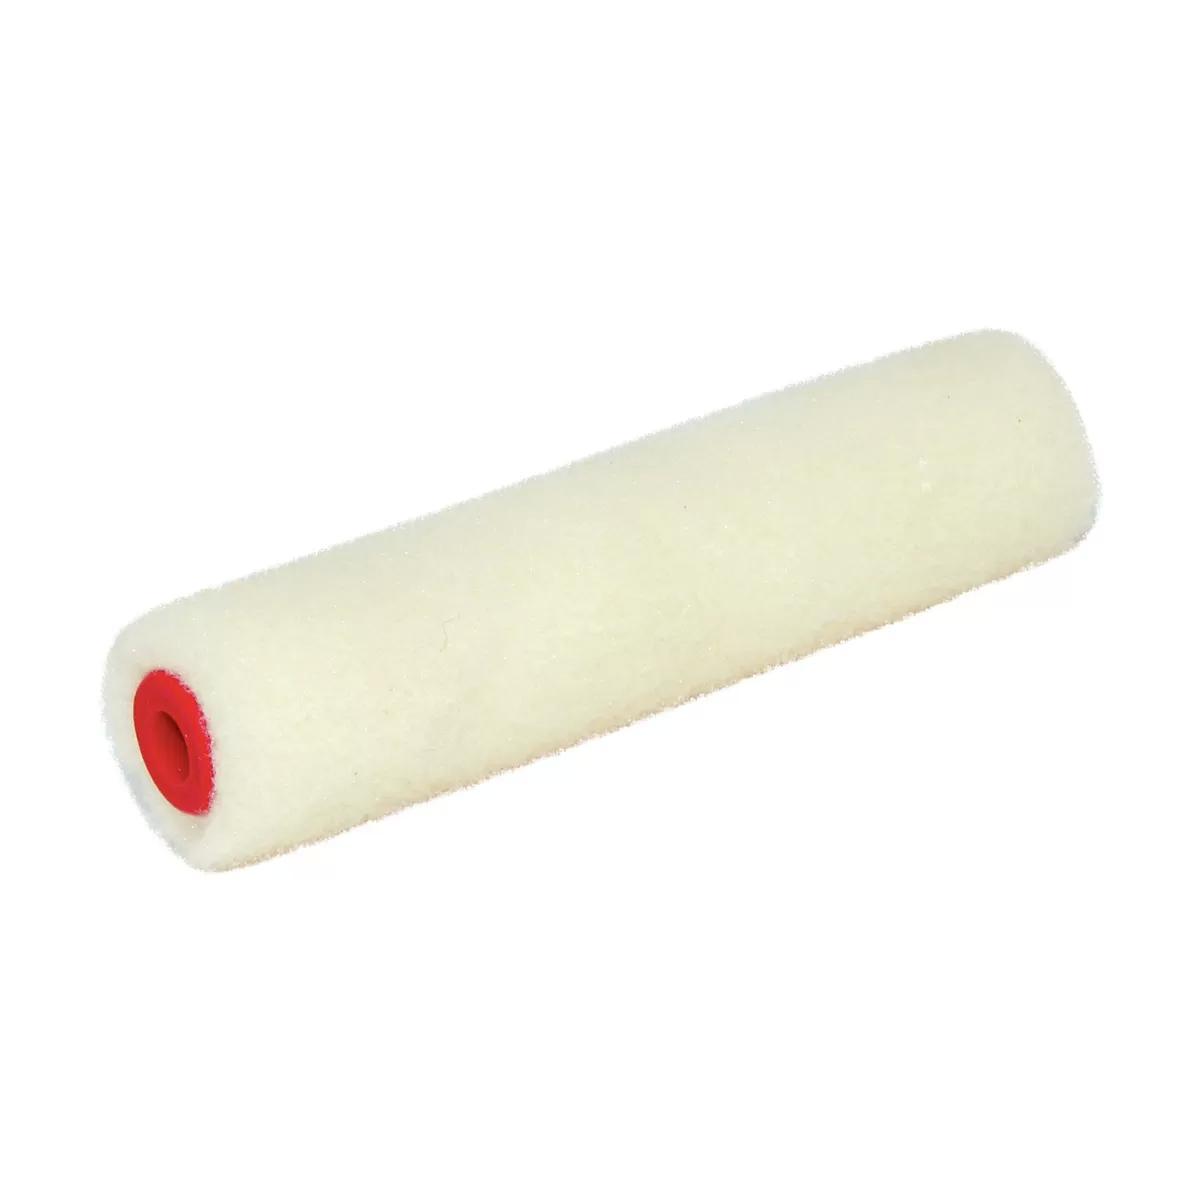 Small paint roller Natural Wool 10cm charge 1pc 